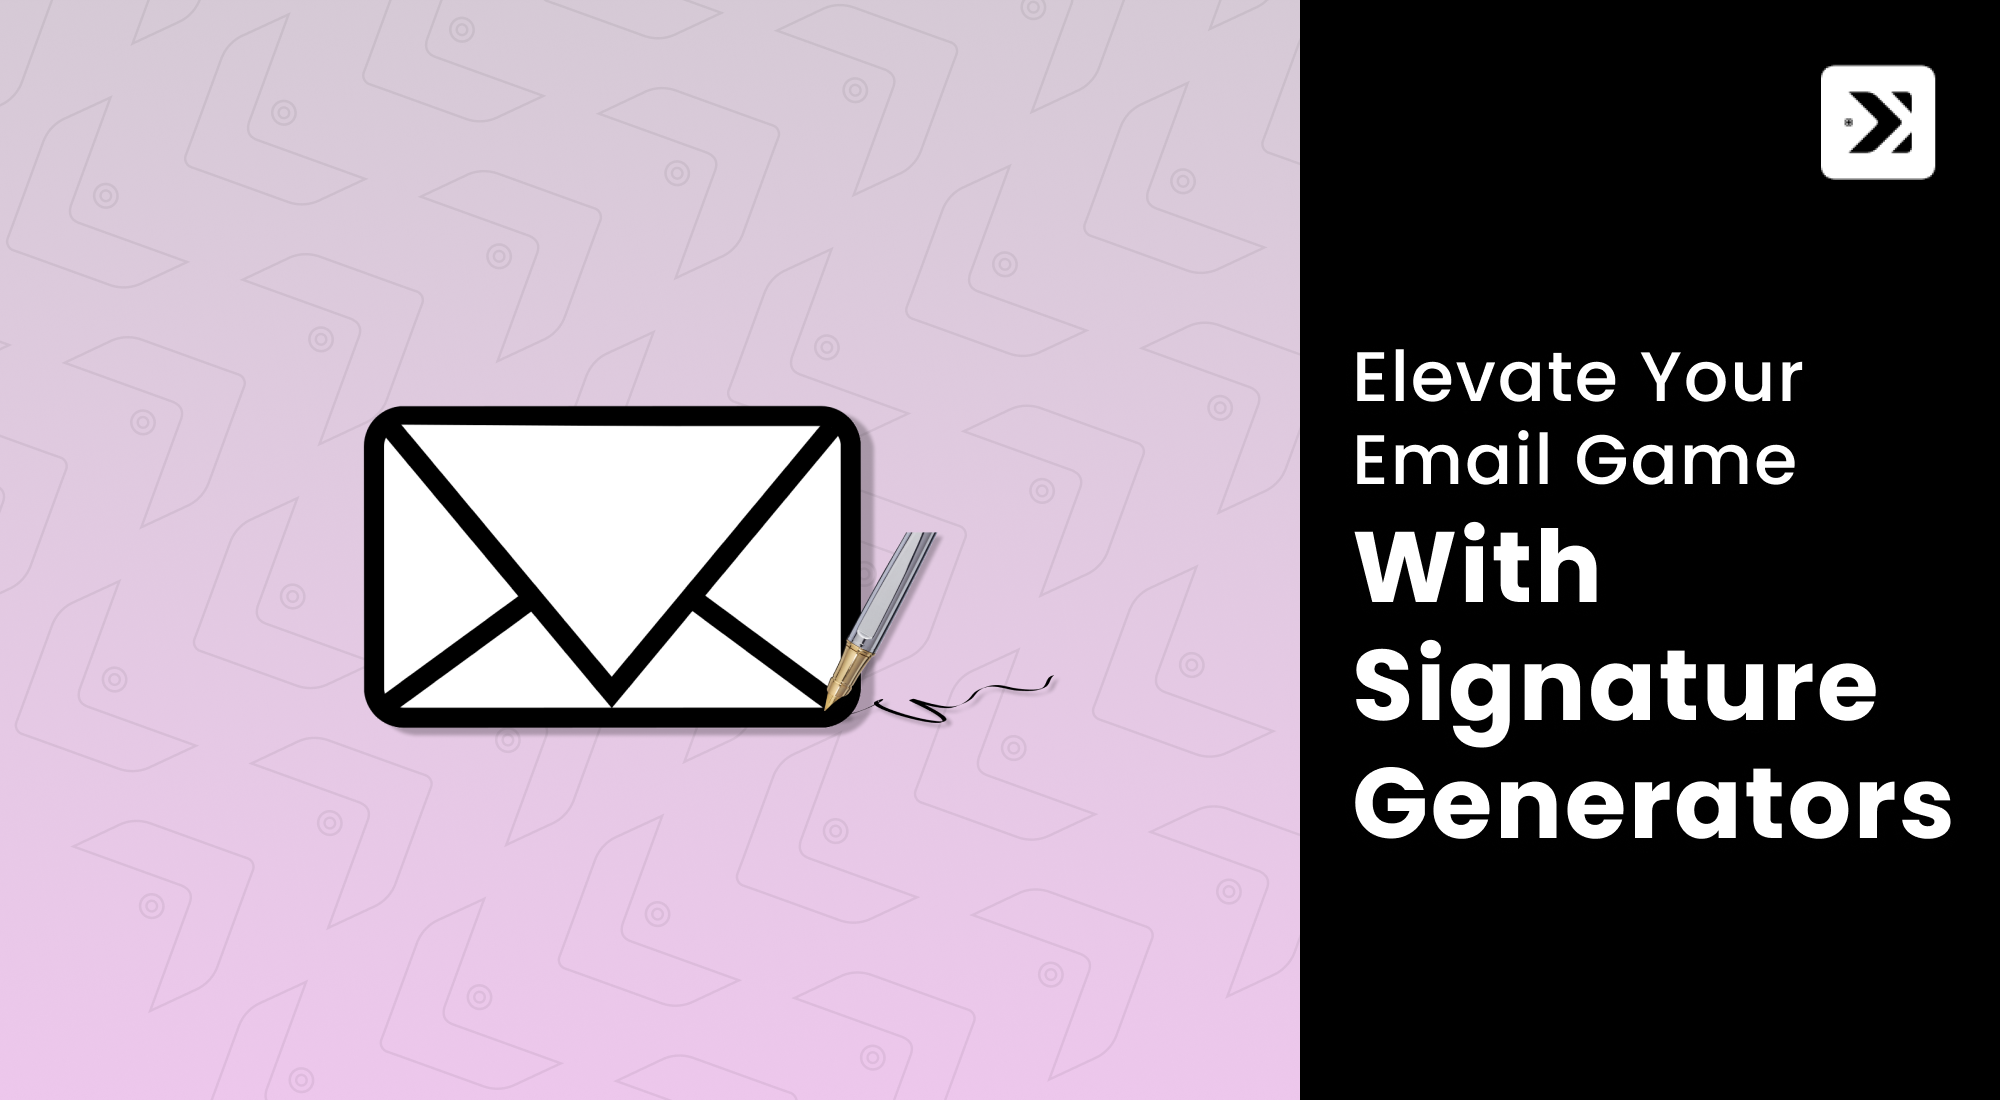 Elevate Your Email Game with Email Signature Generators